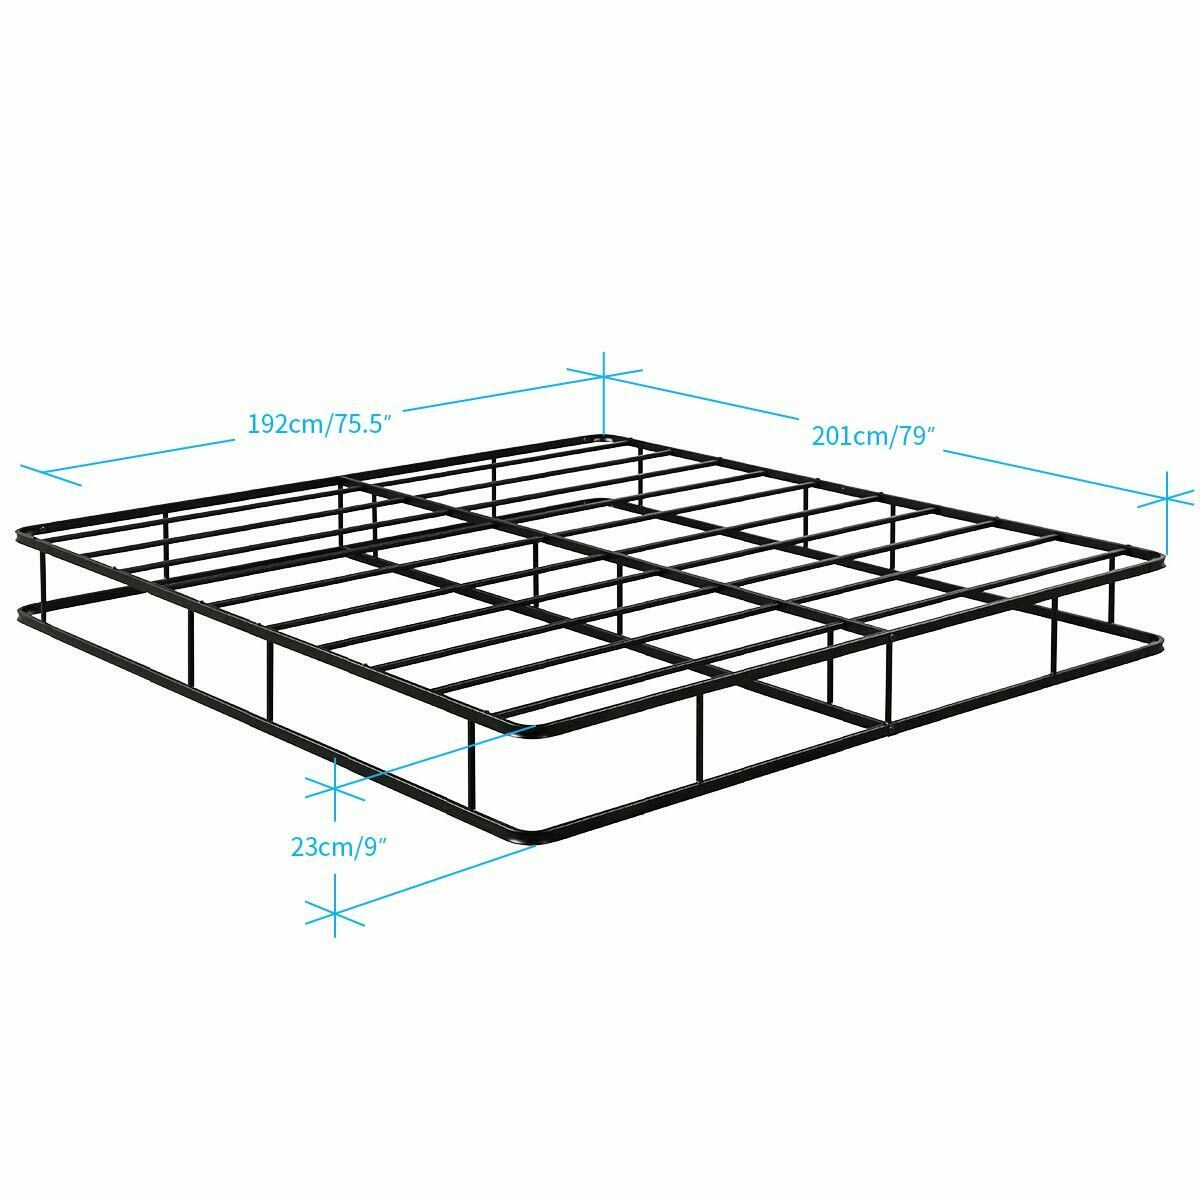 Costway 9 Inch Platform Low Profile Bed, Low Profile Queen Size Metal Bed Frame